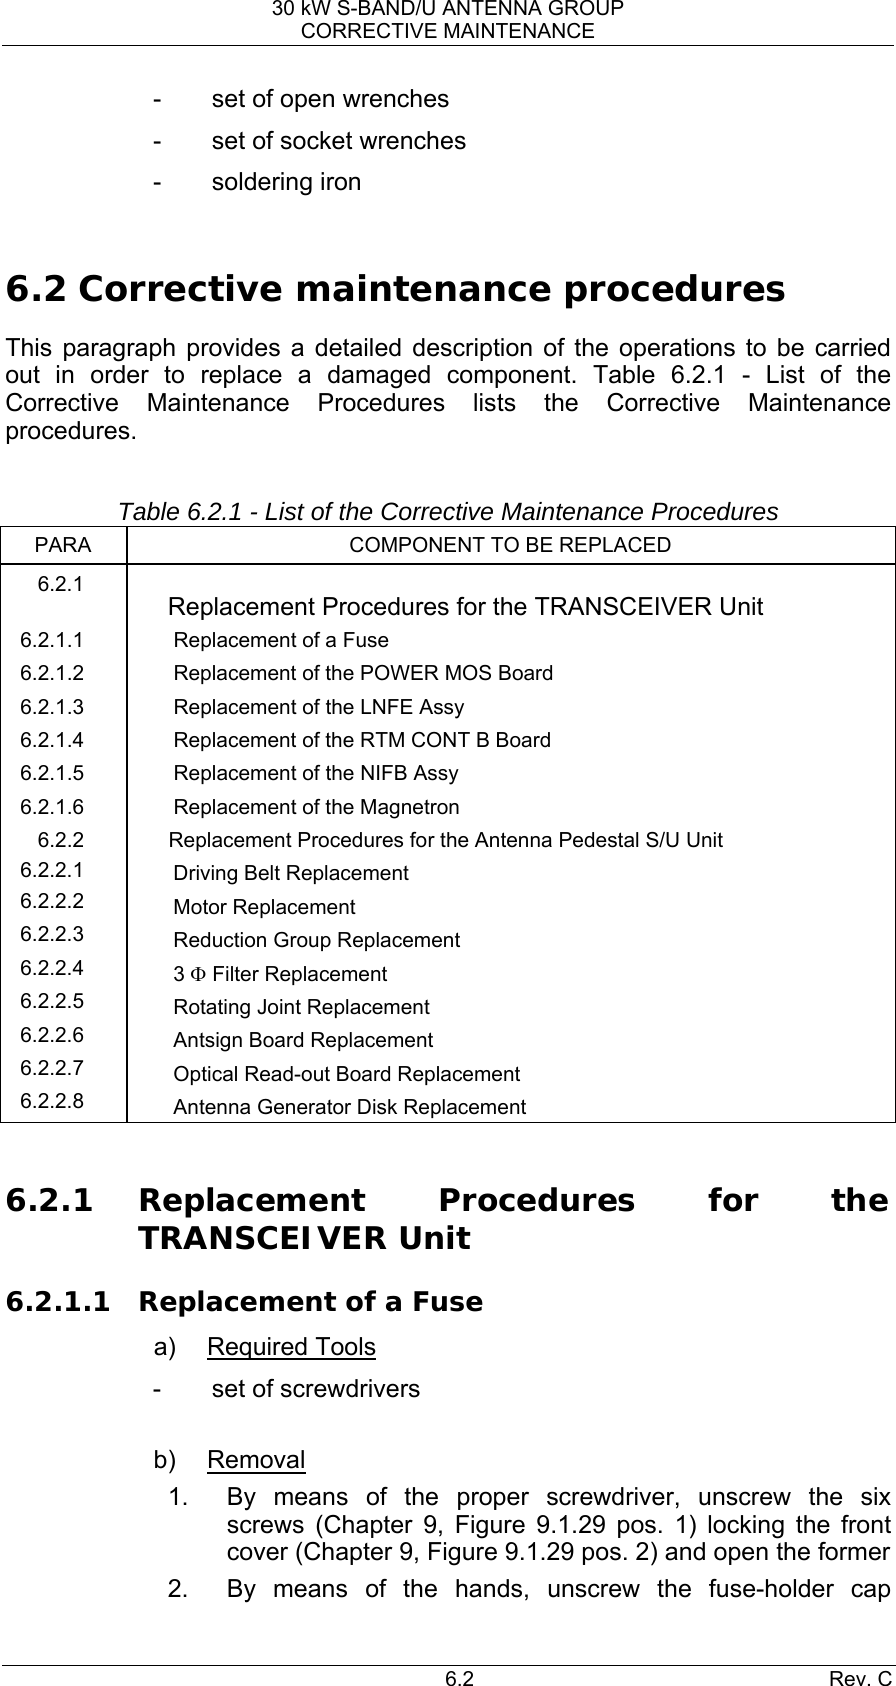 30 kW S-BAND/U ANTENNA GROUP CORRECTIVE MAINTENANCE 6.2 Rev. C -  set of open wrenches -  set of socket wrenches - soldering iron  6.2 Corrective maintenance procedures This paragraph provides a detailed description of the operations to be carried out in order to replace a damaged component. Table 6.2.1 - List of the Corrective Maintenance Procedures lists the Corrective Maintenance procedures.  Table 6.2.1 - List of the Corrective Maintenance Procedures PARA COMPONENT TO BE REPLACED 6.2.1   Replacement Procedures for the TRANSCEIVER Unit 6.2.1.1  Replacement of a Fuse 6.2.1.2  Replacement of the POWER MOS Board 6.2.1.3 Replacement of the LNFE Assy 6.2.1.4  Replacement of the RTM CONT B Board 6.2.1.5 Replacement of the NIFB Assy 6.2.1.6  Replacement of the Magnetron 6.2.2  Replacement Procedures for the Antenna Pedestal S/U Unit 6.2.2.1  Driving Belt Replacement 6.2.2.2  Motor Replacement 6.2.2.3  Reduction Group Replacement 6.2.2.4  3 Φ Filter Replacement 6.2.2.5  Rotating Joint Replacement 6.2.2.6  Antsign Board Replacement 6.2.2.7  Optical Read-out Board Replacement 6.2.2.8  Antenna Generator Disk Replacement  6.2.1 Replacement Procedures for the TRANSCEIVER Unit 6.2.1.1 Replacement of a Fuse a) Required Tools -  set of screwdrivers  b) Removal 1.  By means of the proper screwdriver, unscrew the six screws (Chapter 9, Figure 9.1.29 pos. 1) locking the front cover (Chapter 9, Figure 9.1.29 pos. 2) and open the former 2.  By means of the hands, unscrew the fuse-holder cap 